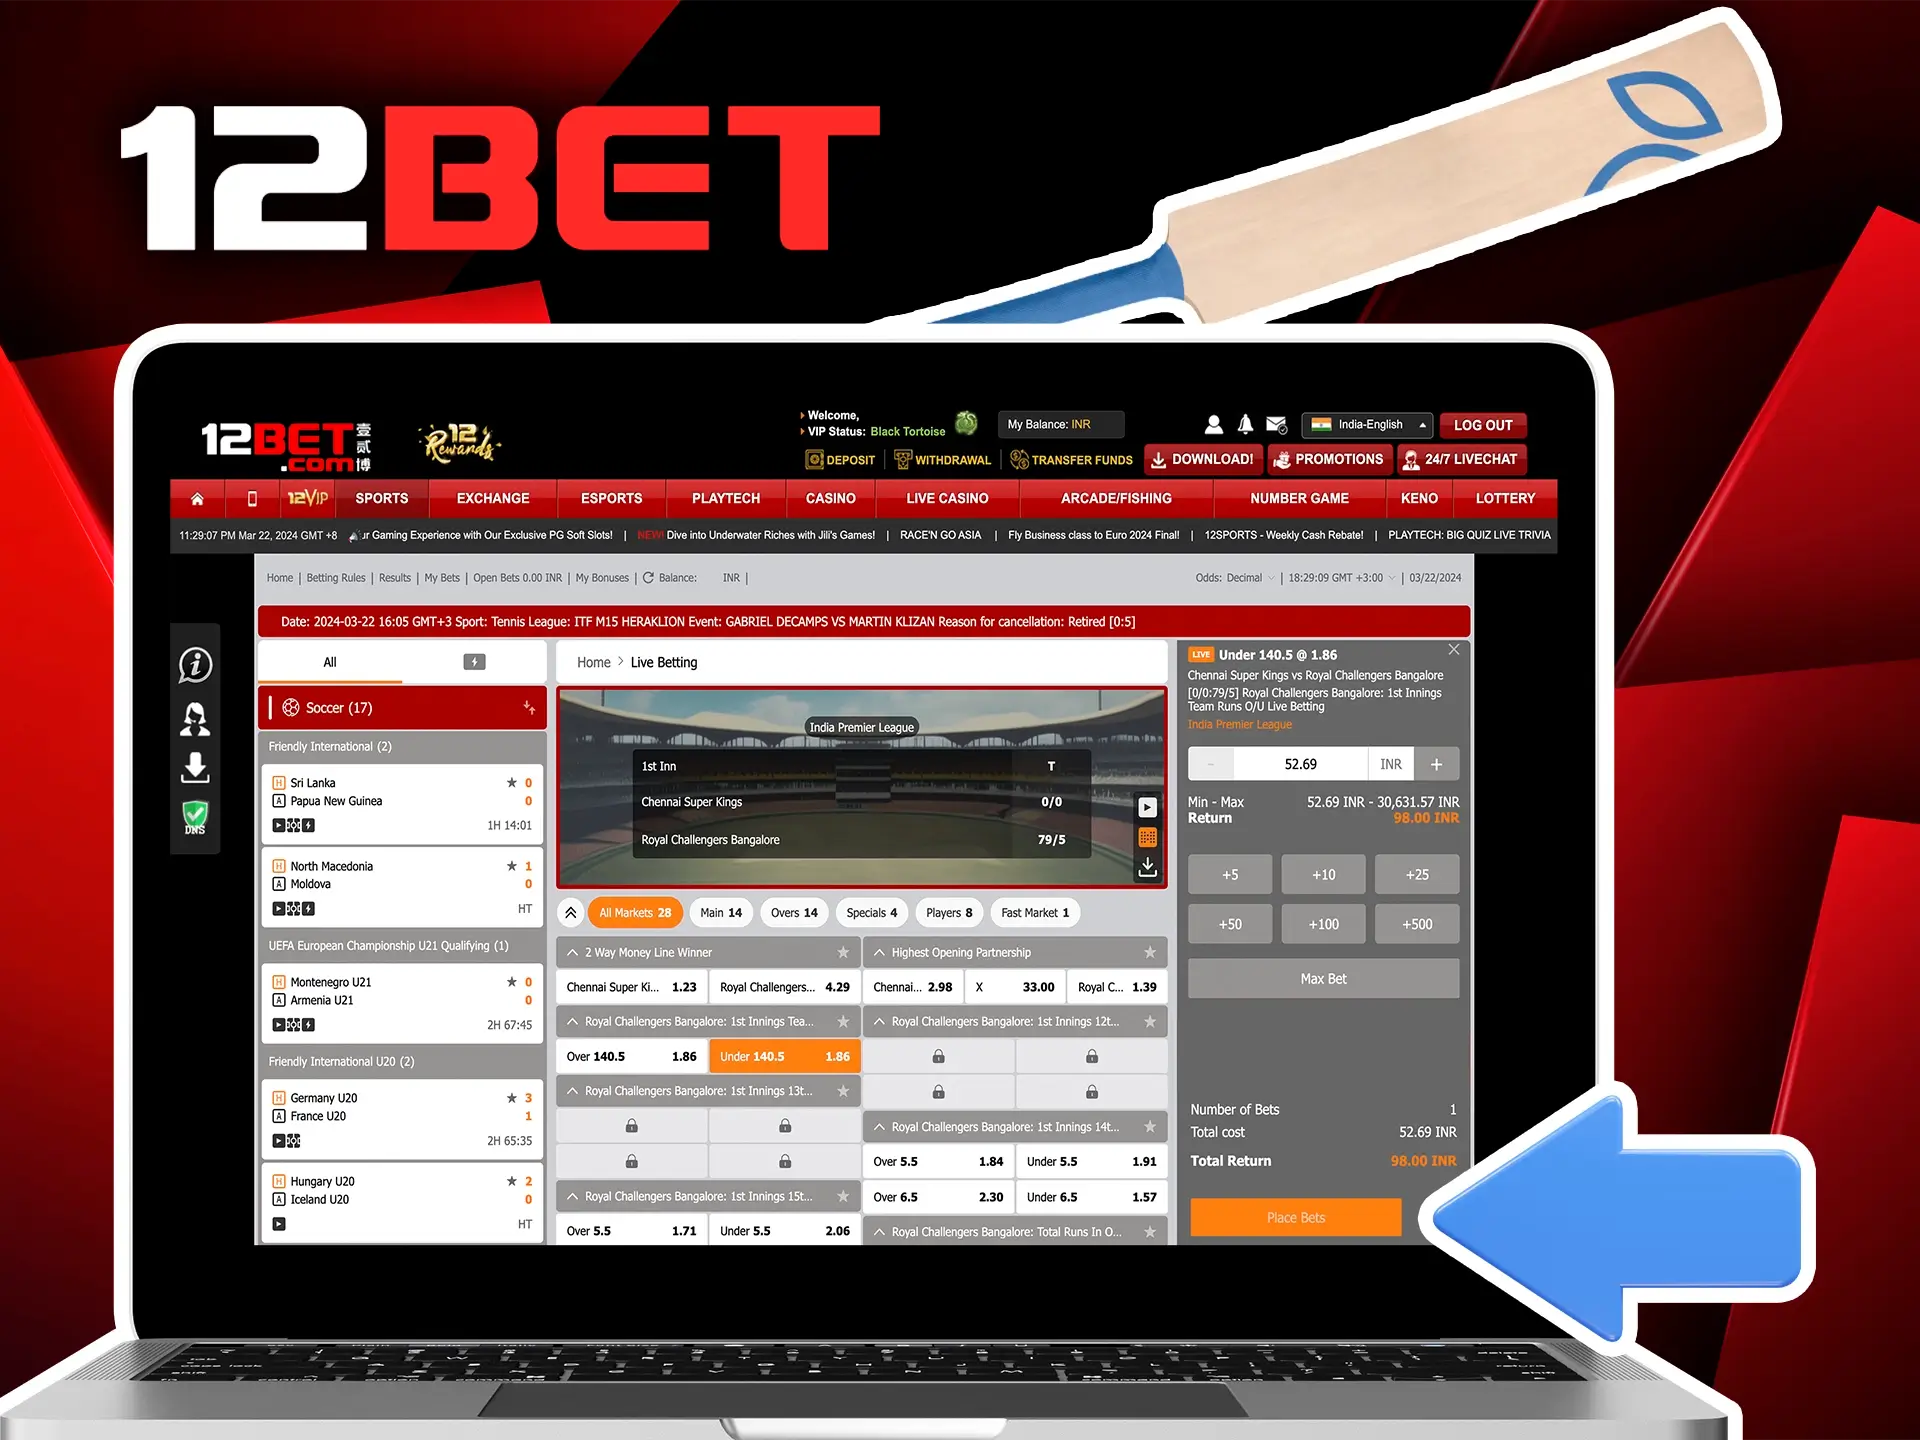 Enter your 12Bet account login details and get the opportunity to make predictions for the popular IPL tournament in India.